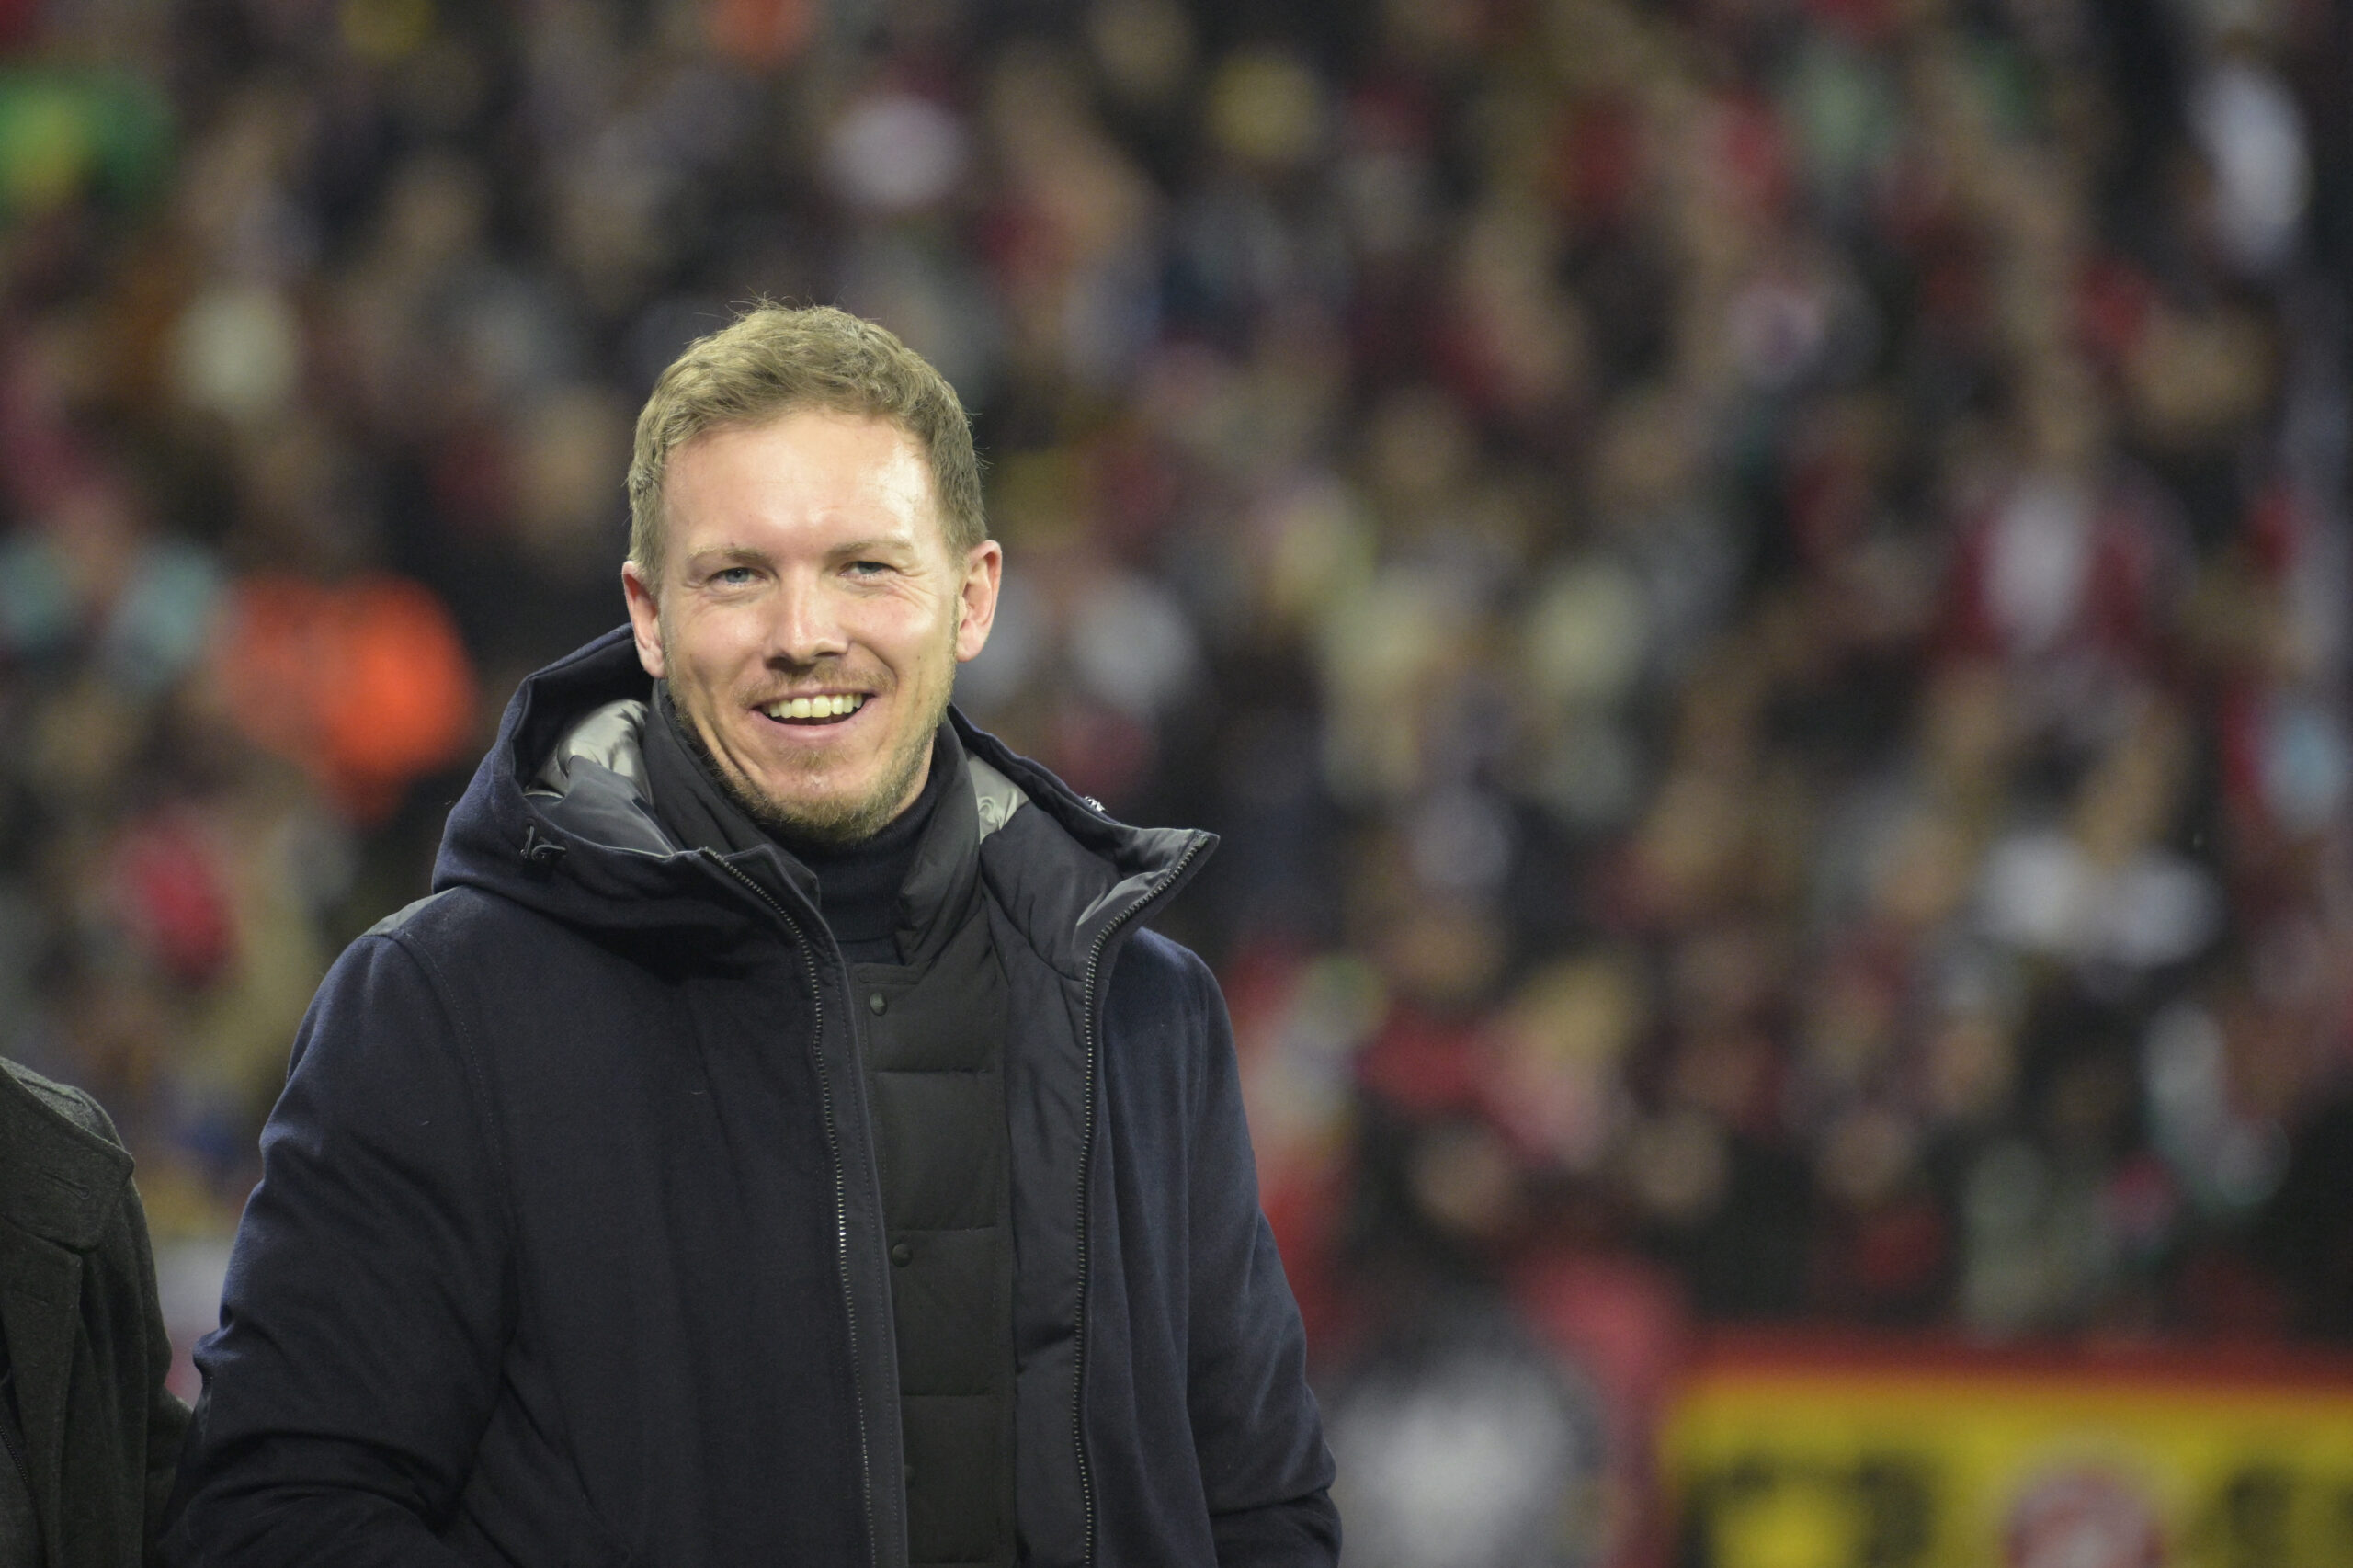 Germany's head coach Julian Nagelsmann is pictured prior to the German first division Bundesliga football match between Bayer 04 Leverkusen and FC Bayern Munich in Leverkusen, western Germany on February 10, 2024.